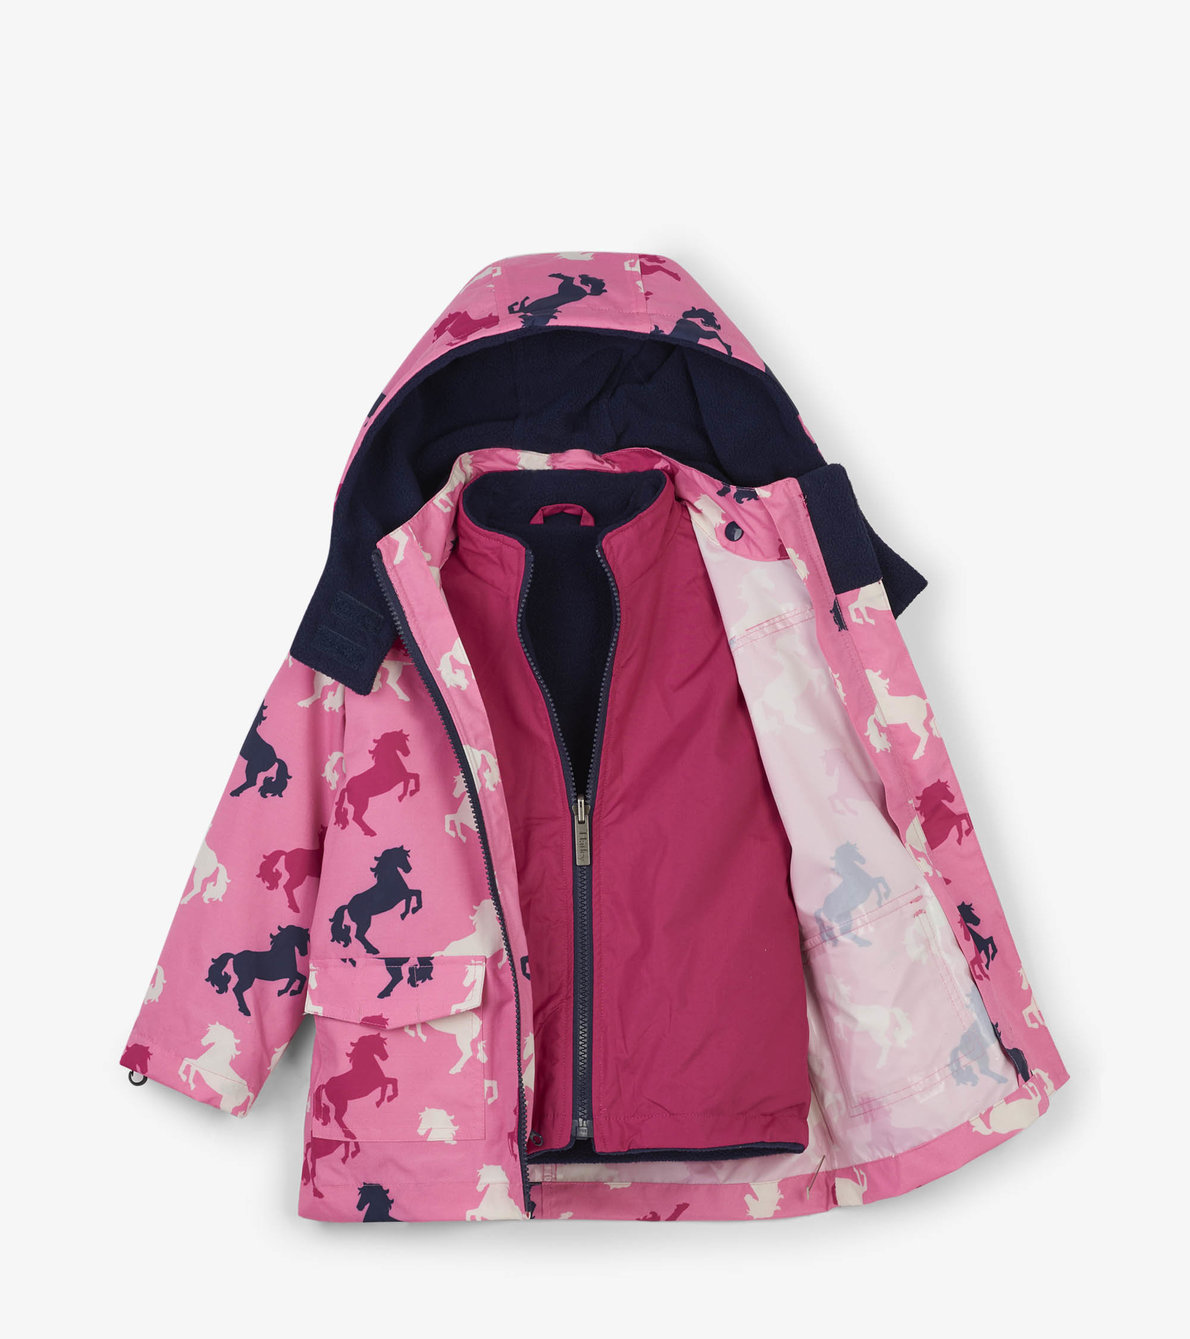 View larger image of Playful Horses 4-in-1 Winter Jacket